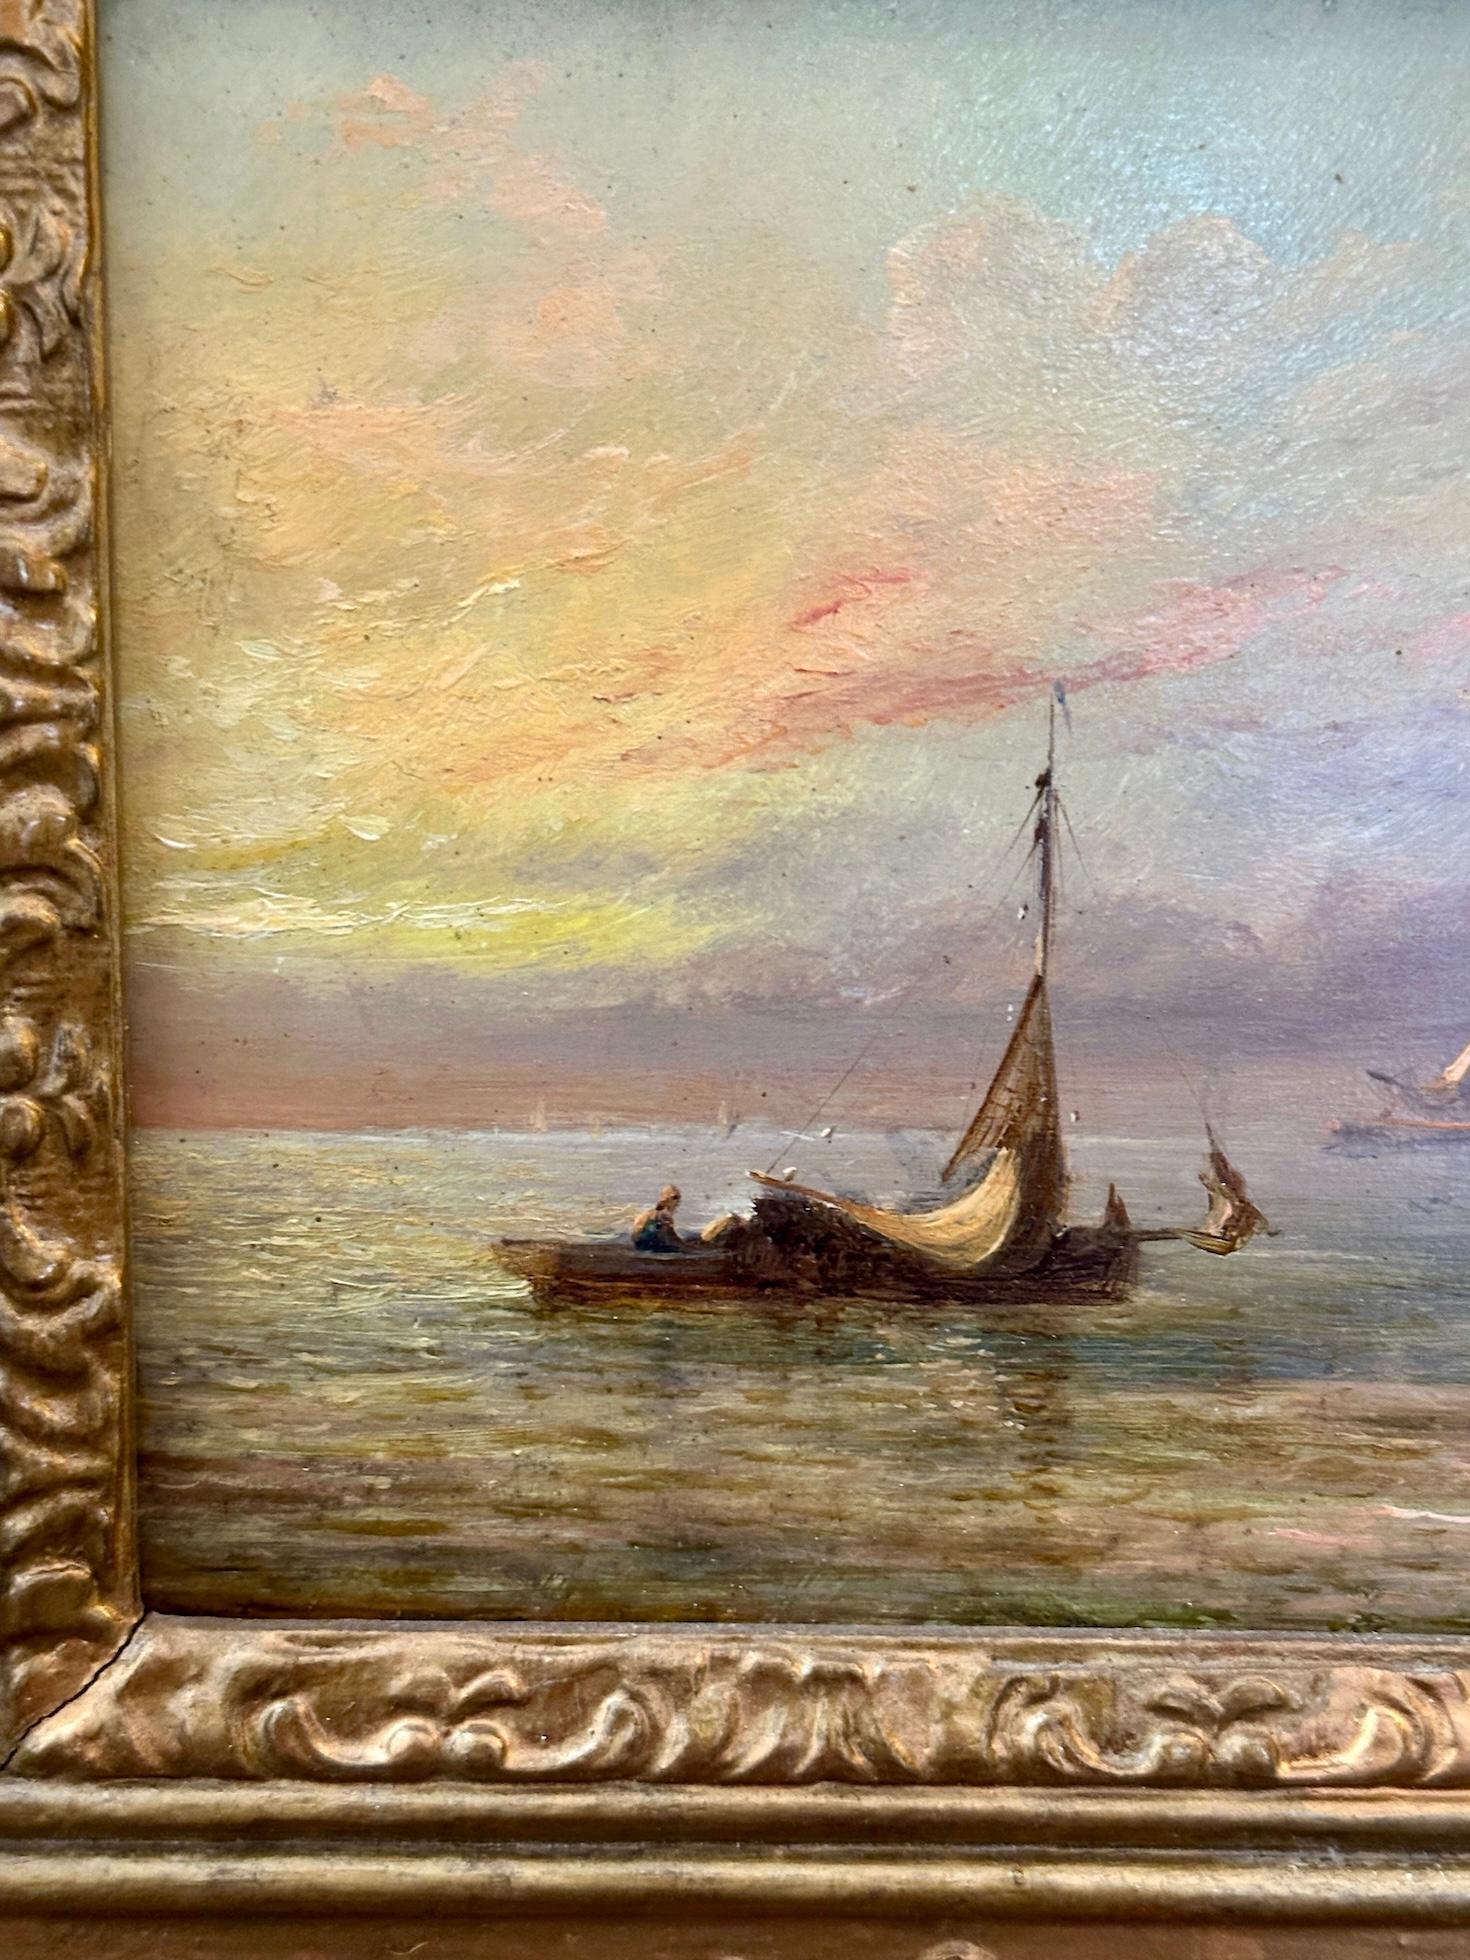 Adolphus Knell

19th century English fishing boast at Sea.

Investing in a 19th-century English fishing boat captured at sea circa 1880 by Adolphus Knell, with the sun rising or setting, offers more than just a piece of artwork—it's a window to a